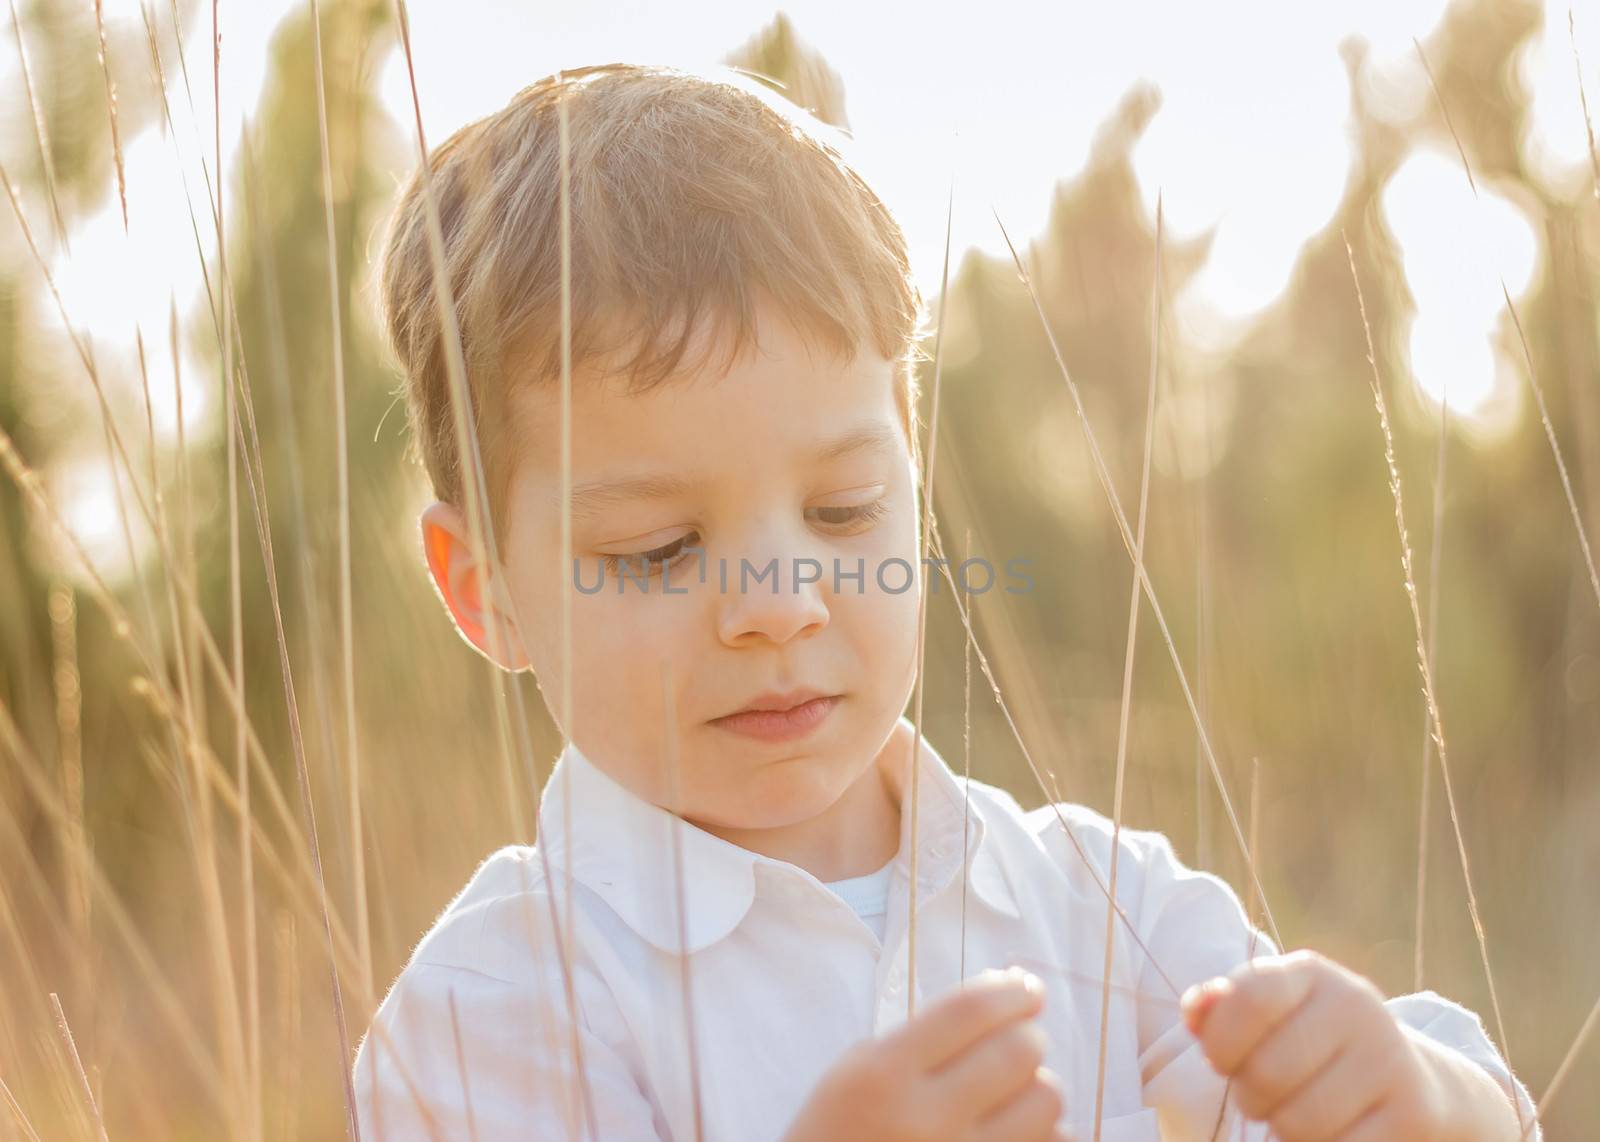 Kid in field playing with spikes at summer sunset by doble.d